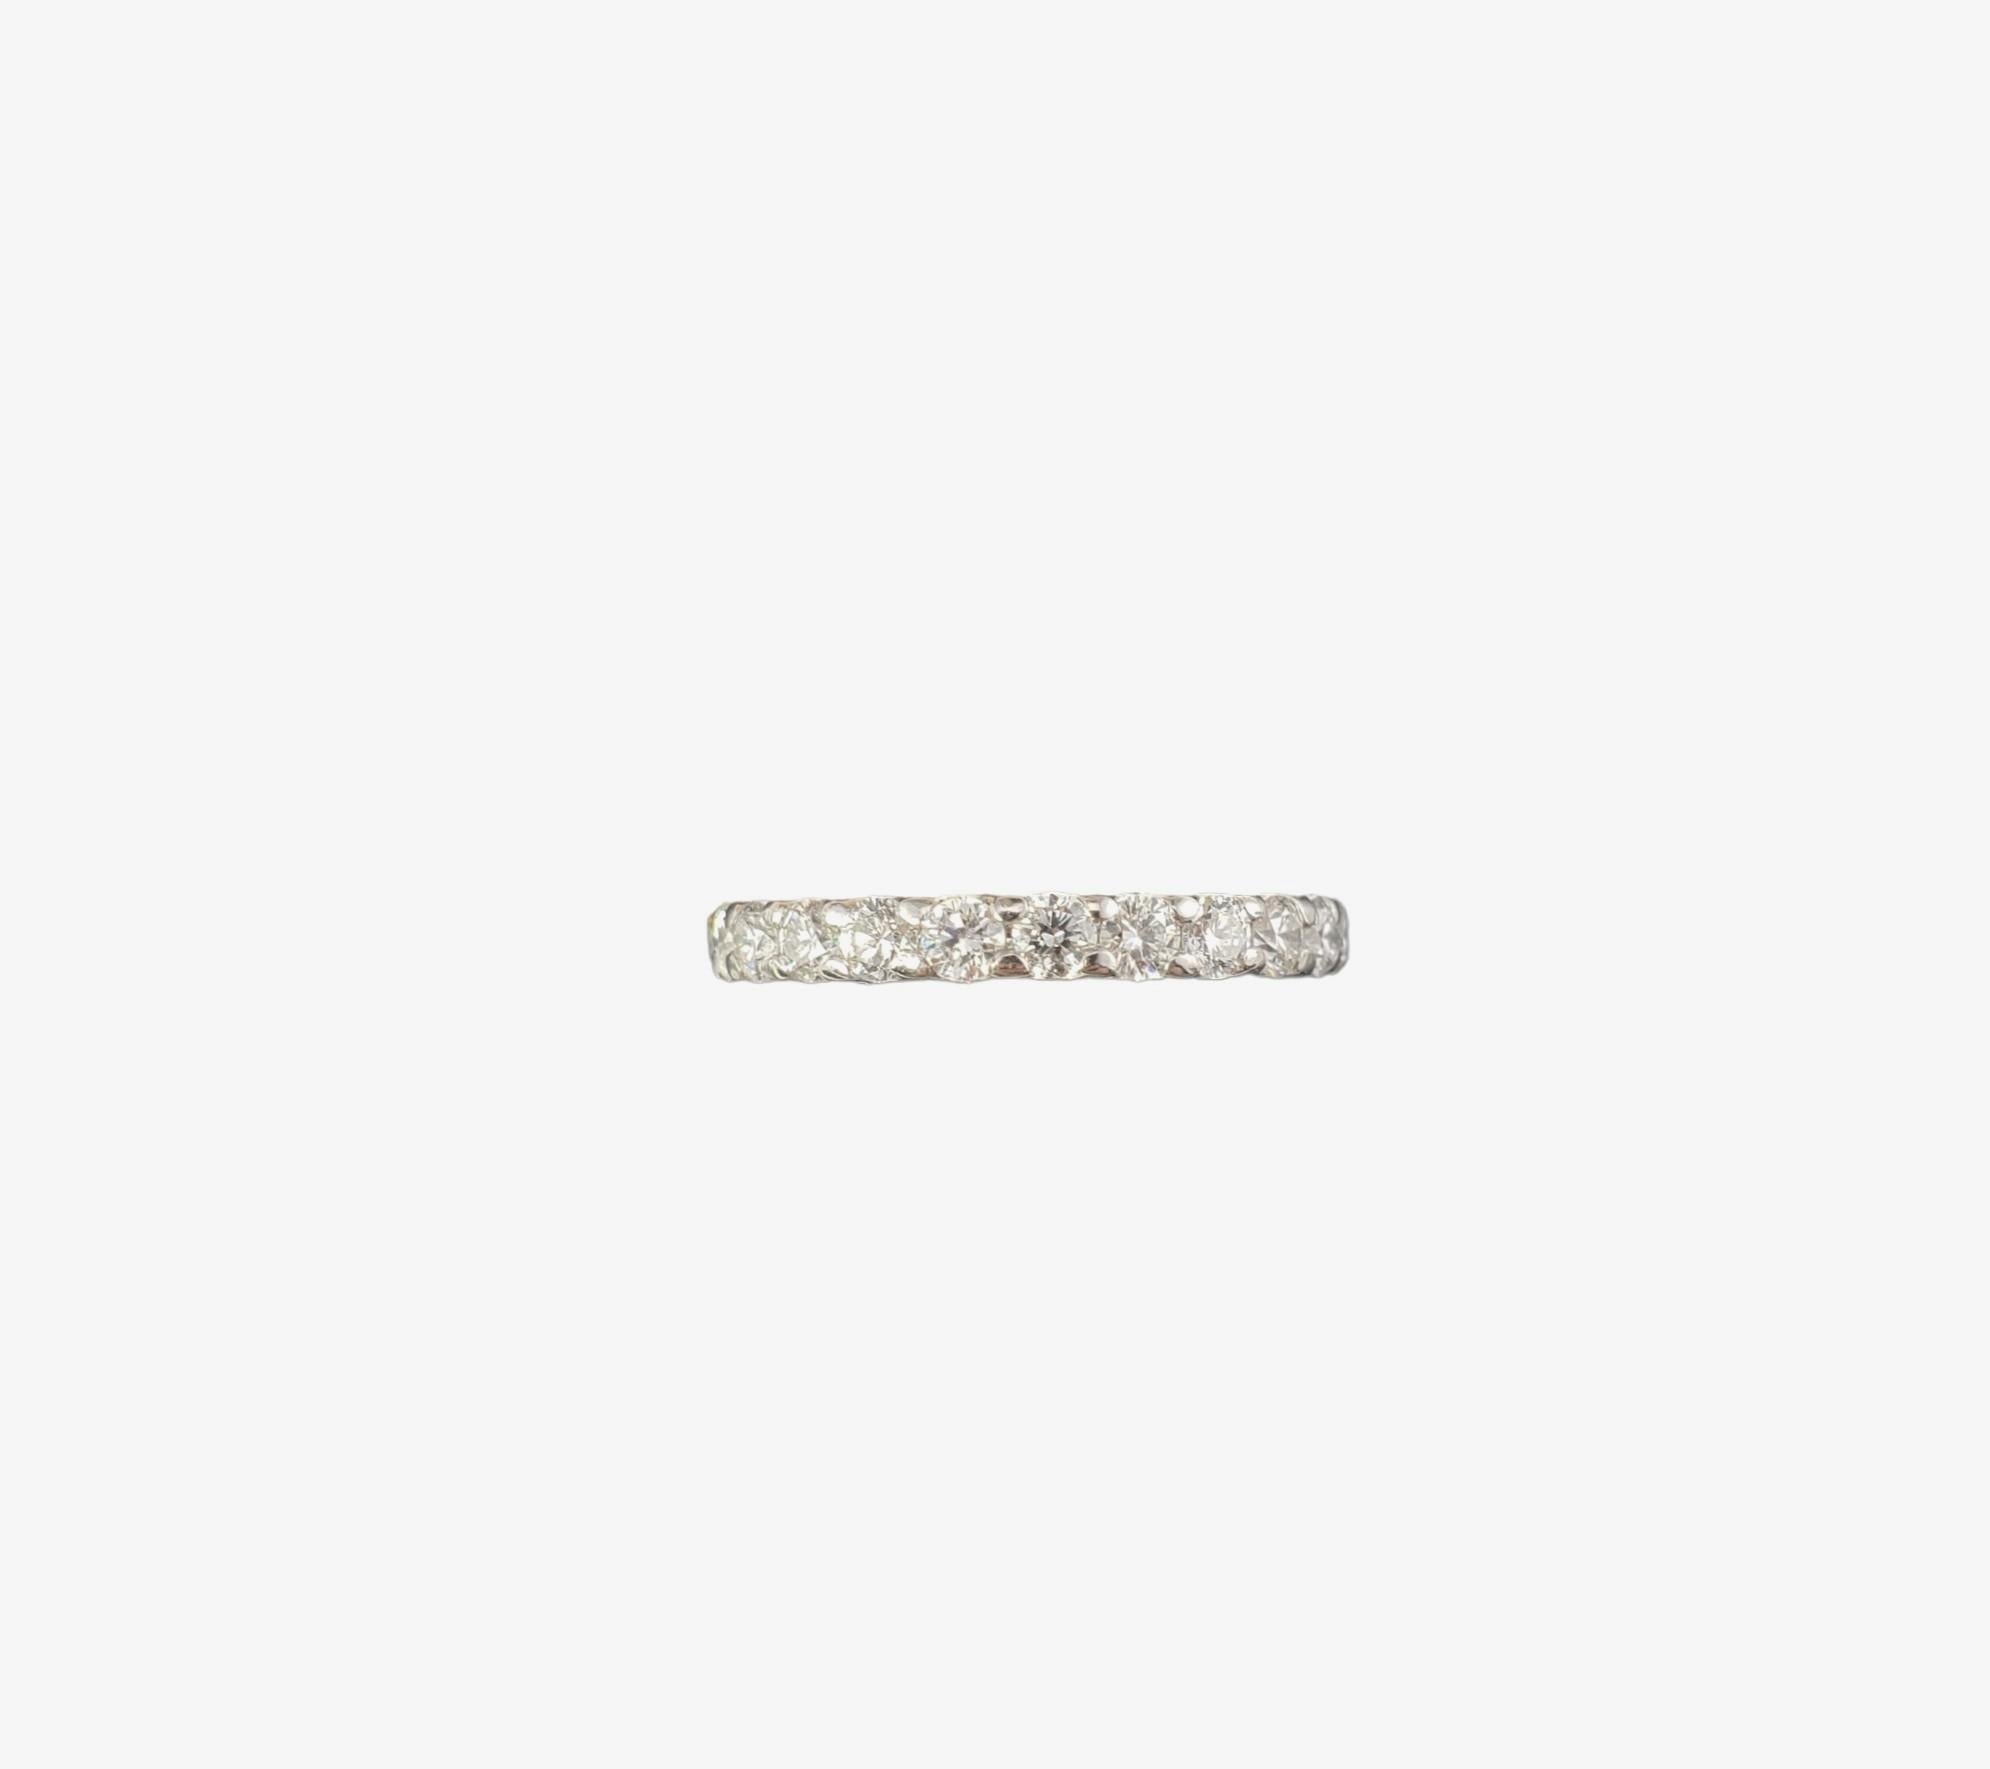 Vintage Platinum Diamond Eternity Band Ring Size 5.25-5.5-

This sparkling eternity band features 24 round brilliant cut diamonds set in classic platinum.  Width: 2.5 mm.
Inner engraving reads, 